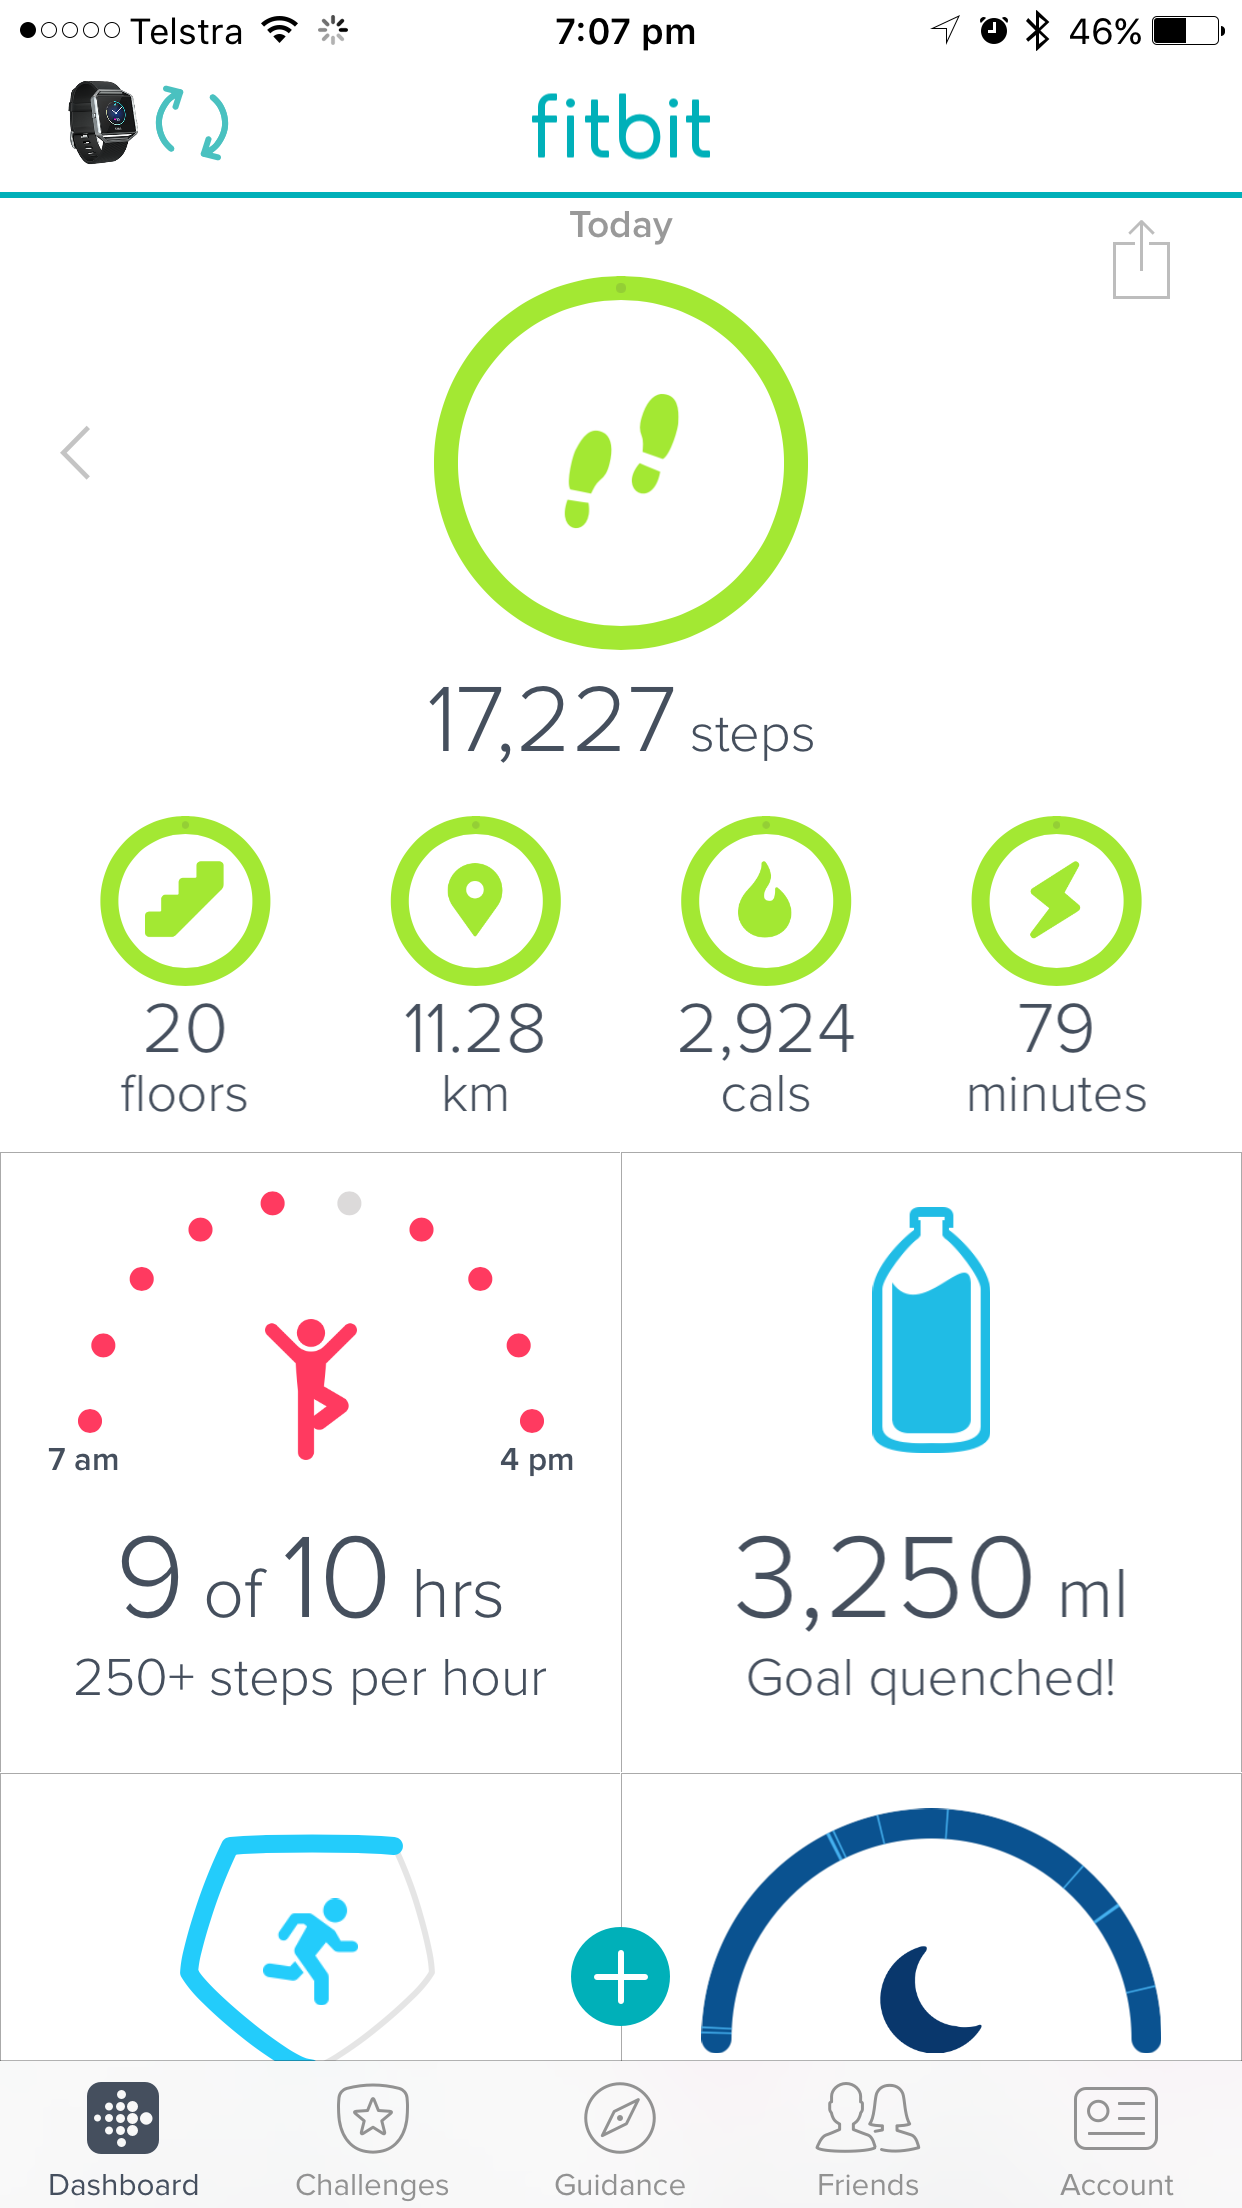 Hour with 250+ Steps missing after sync 